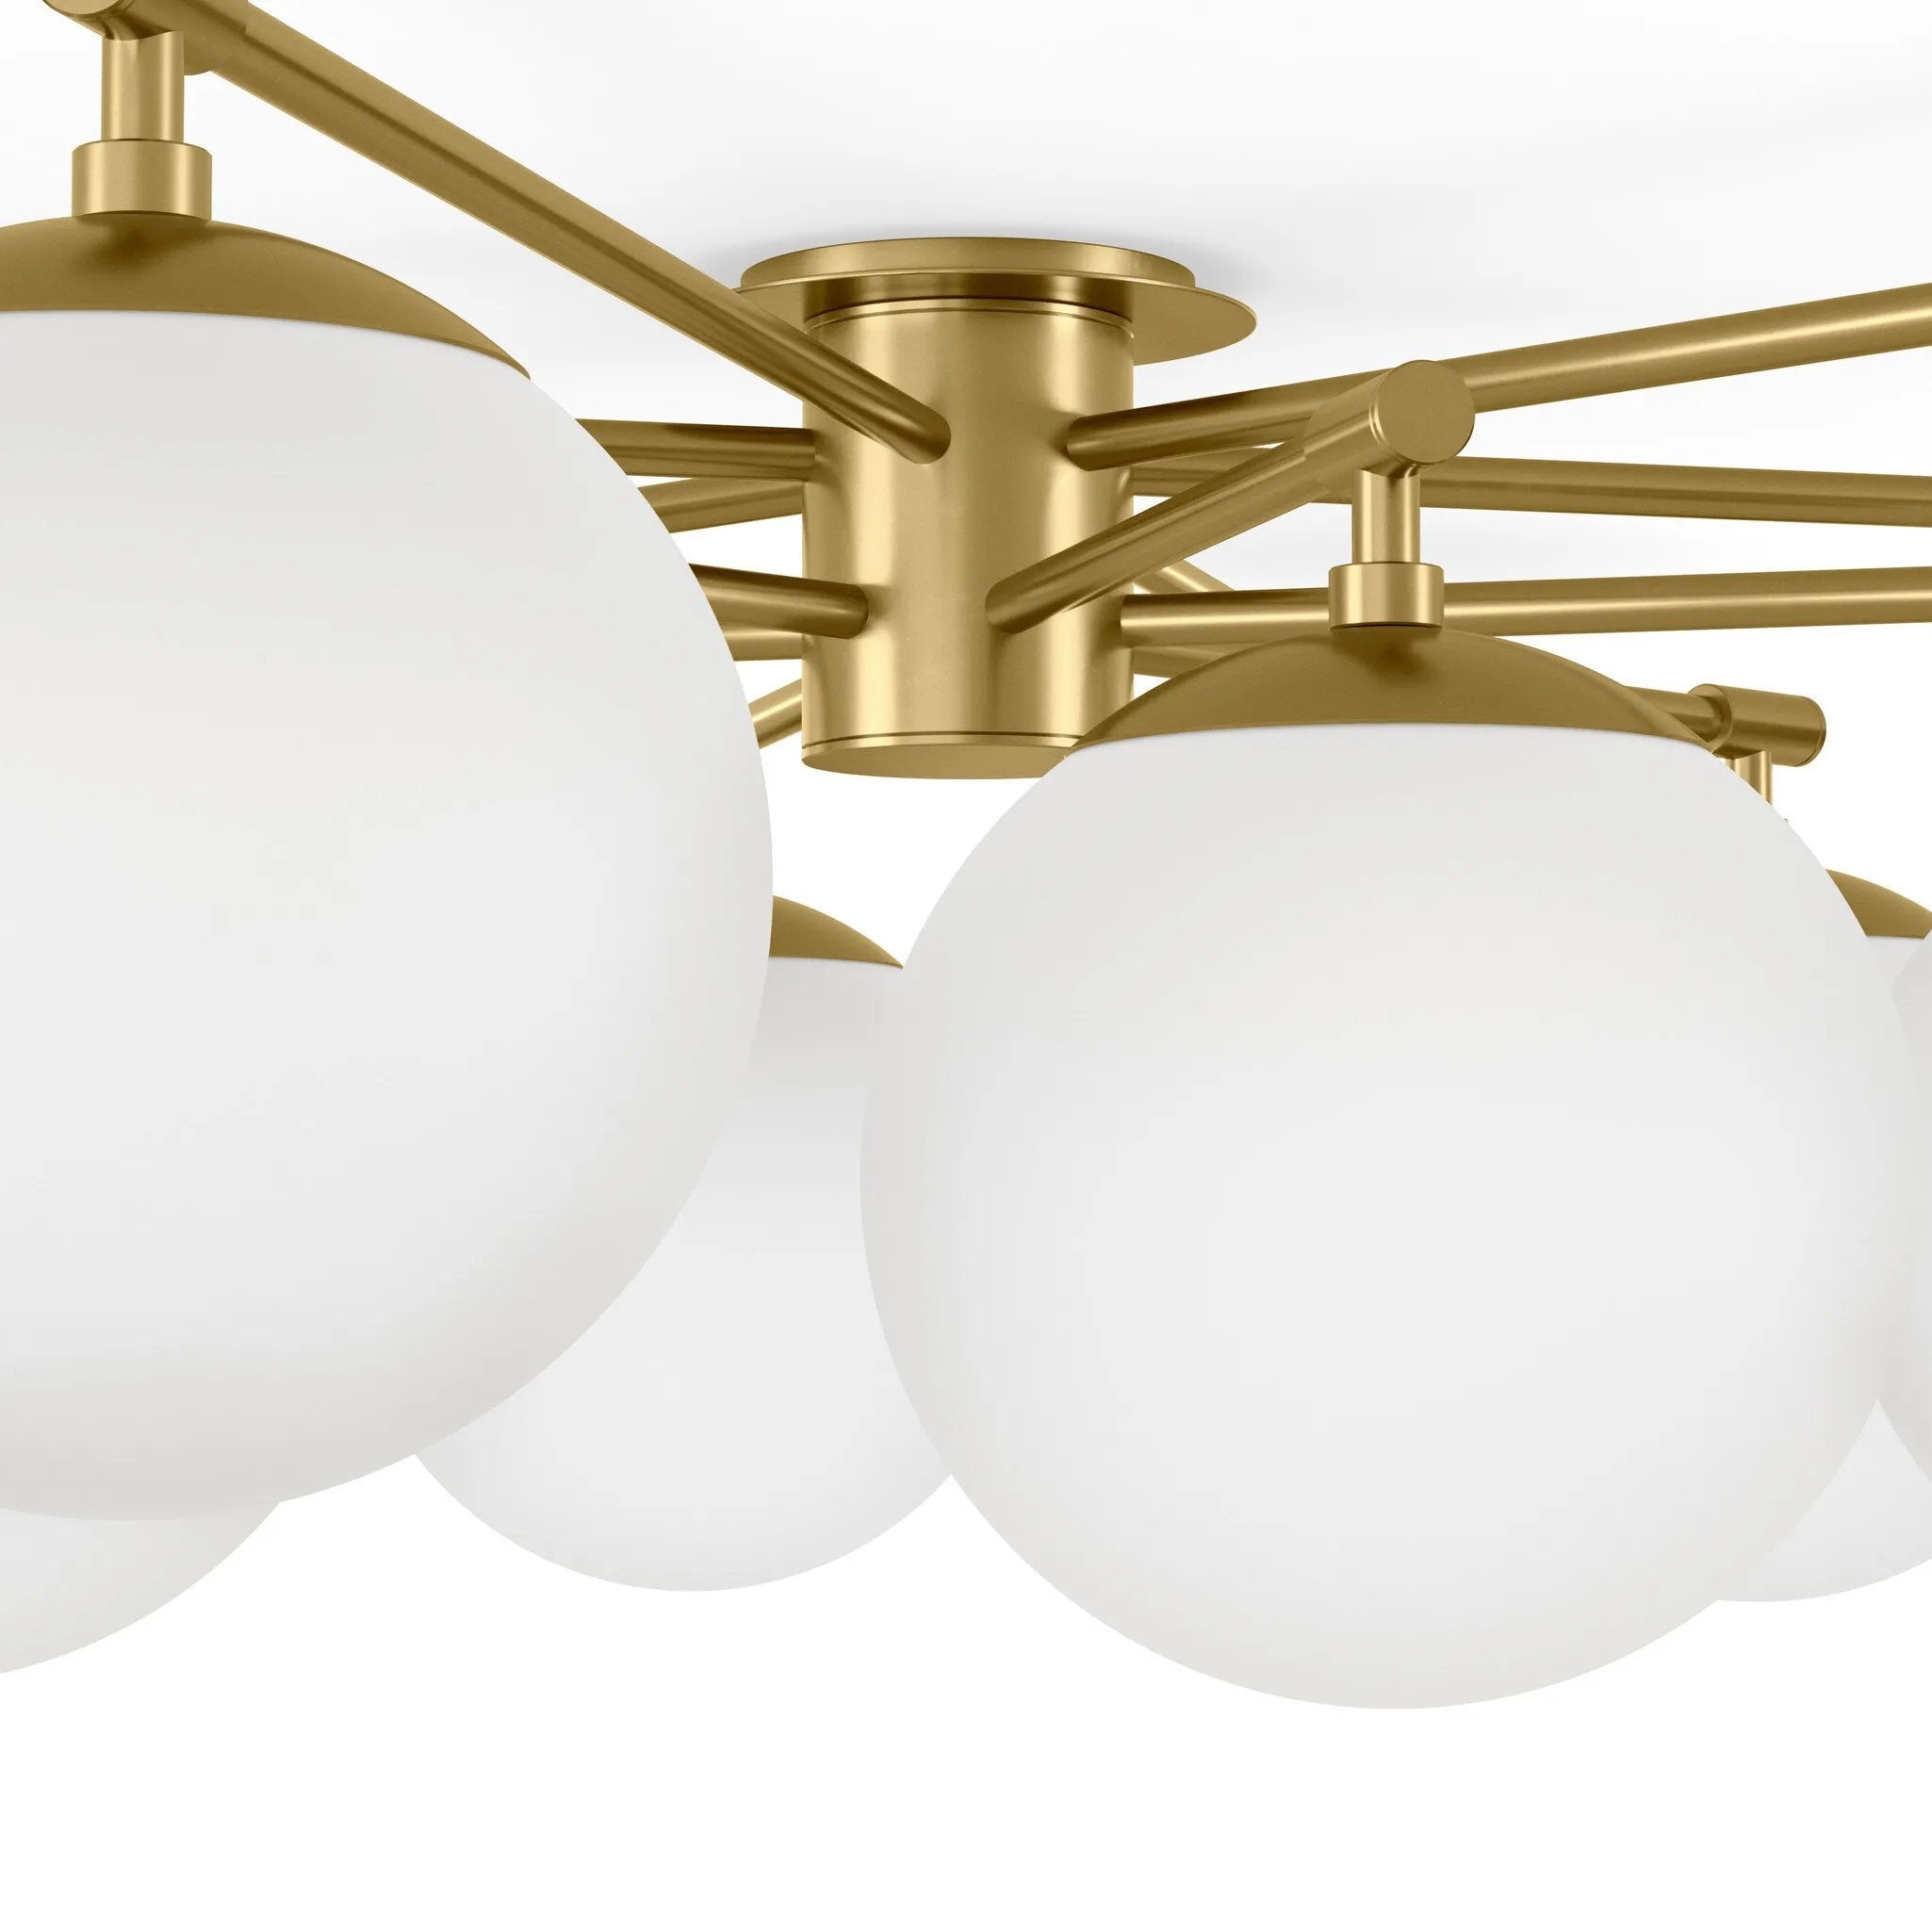 Matte glass spheres seem to extend and reach across smooth brass rods. Each globe is individually blown, shaped and sculpted by hand through a one-hour process. Matte globes are specially manufactured to evenly diffuse light. Brass and glass are 98% recyclable. Designed and sustainably crafted in Poland by Schwung.Overall Dimensions47.75"w x 47. Amethyst Home provides interior design, new home construction design consulting, vintage area rugs, and lighting in the Washington metro area.